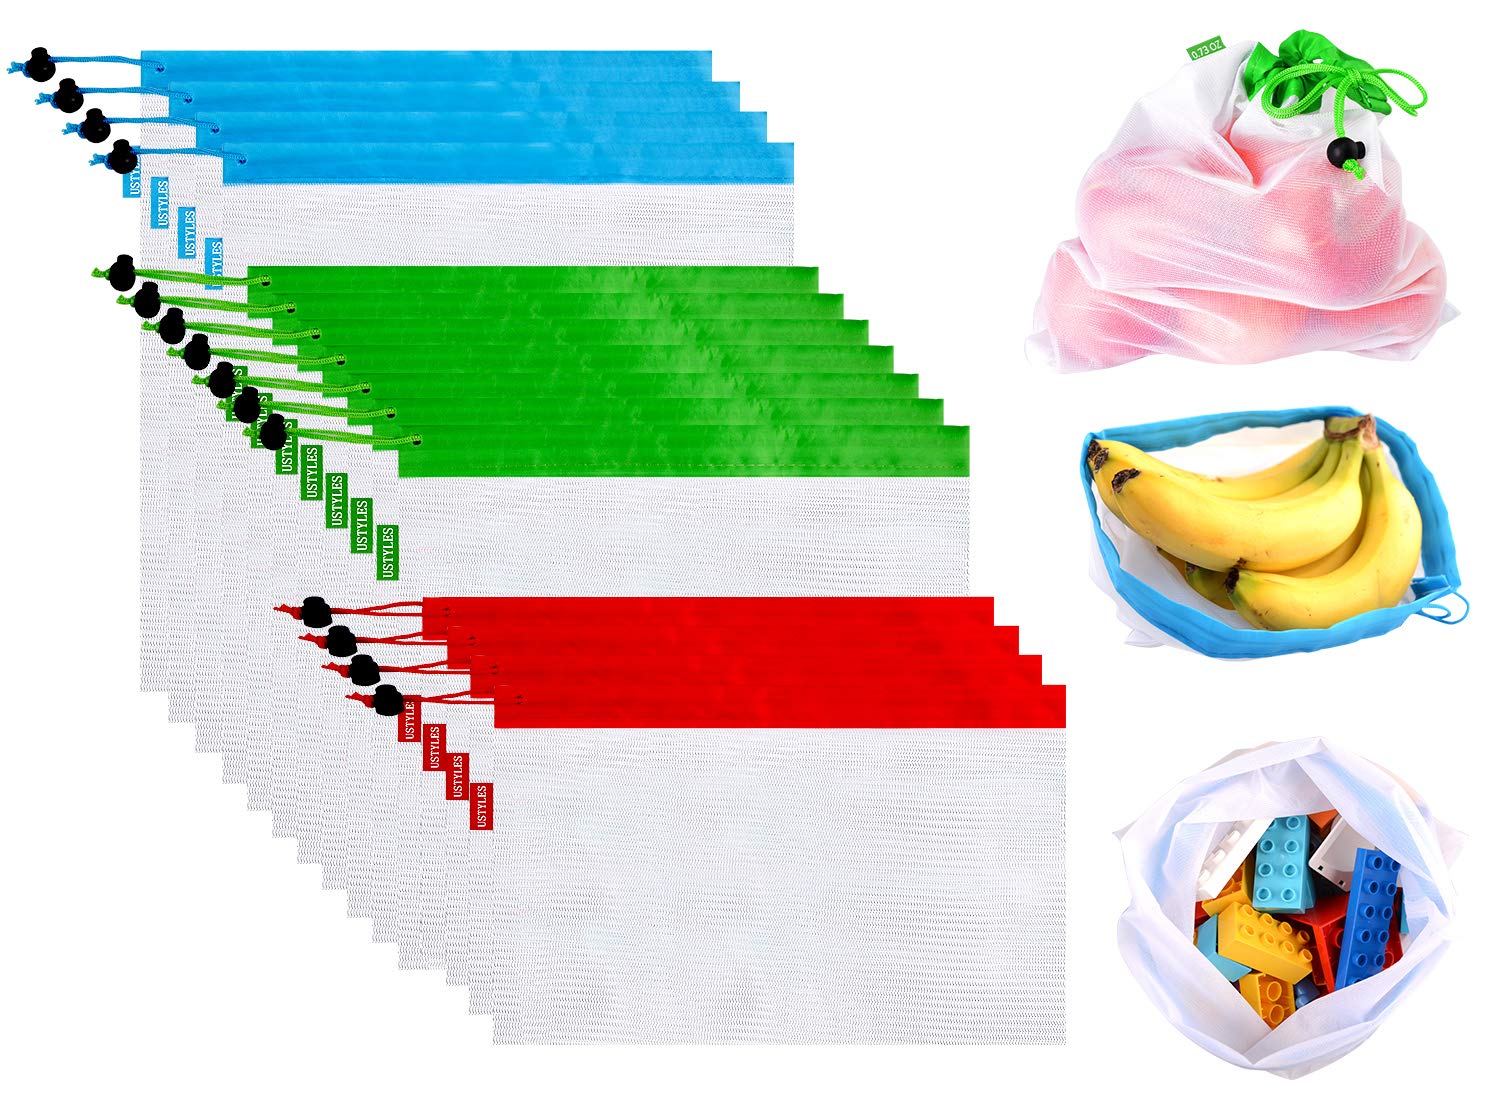 Upgrade Reusable Produce Bags 15Pcs, Zero Waste Reusable Produce Bags Double-Stitched Washable Lightweight See Through with Tare Weight Labels Eco Friendly Produce Bags for Fruit Veggies Toy